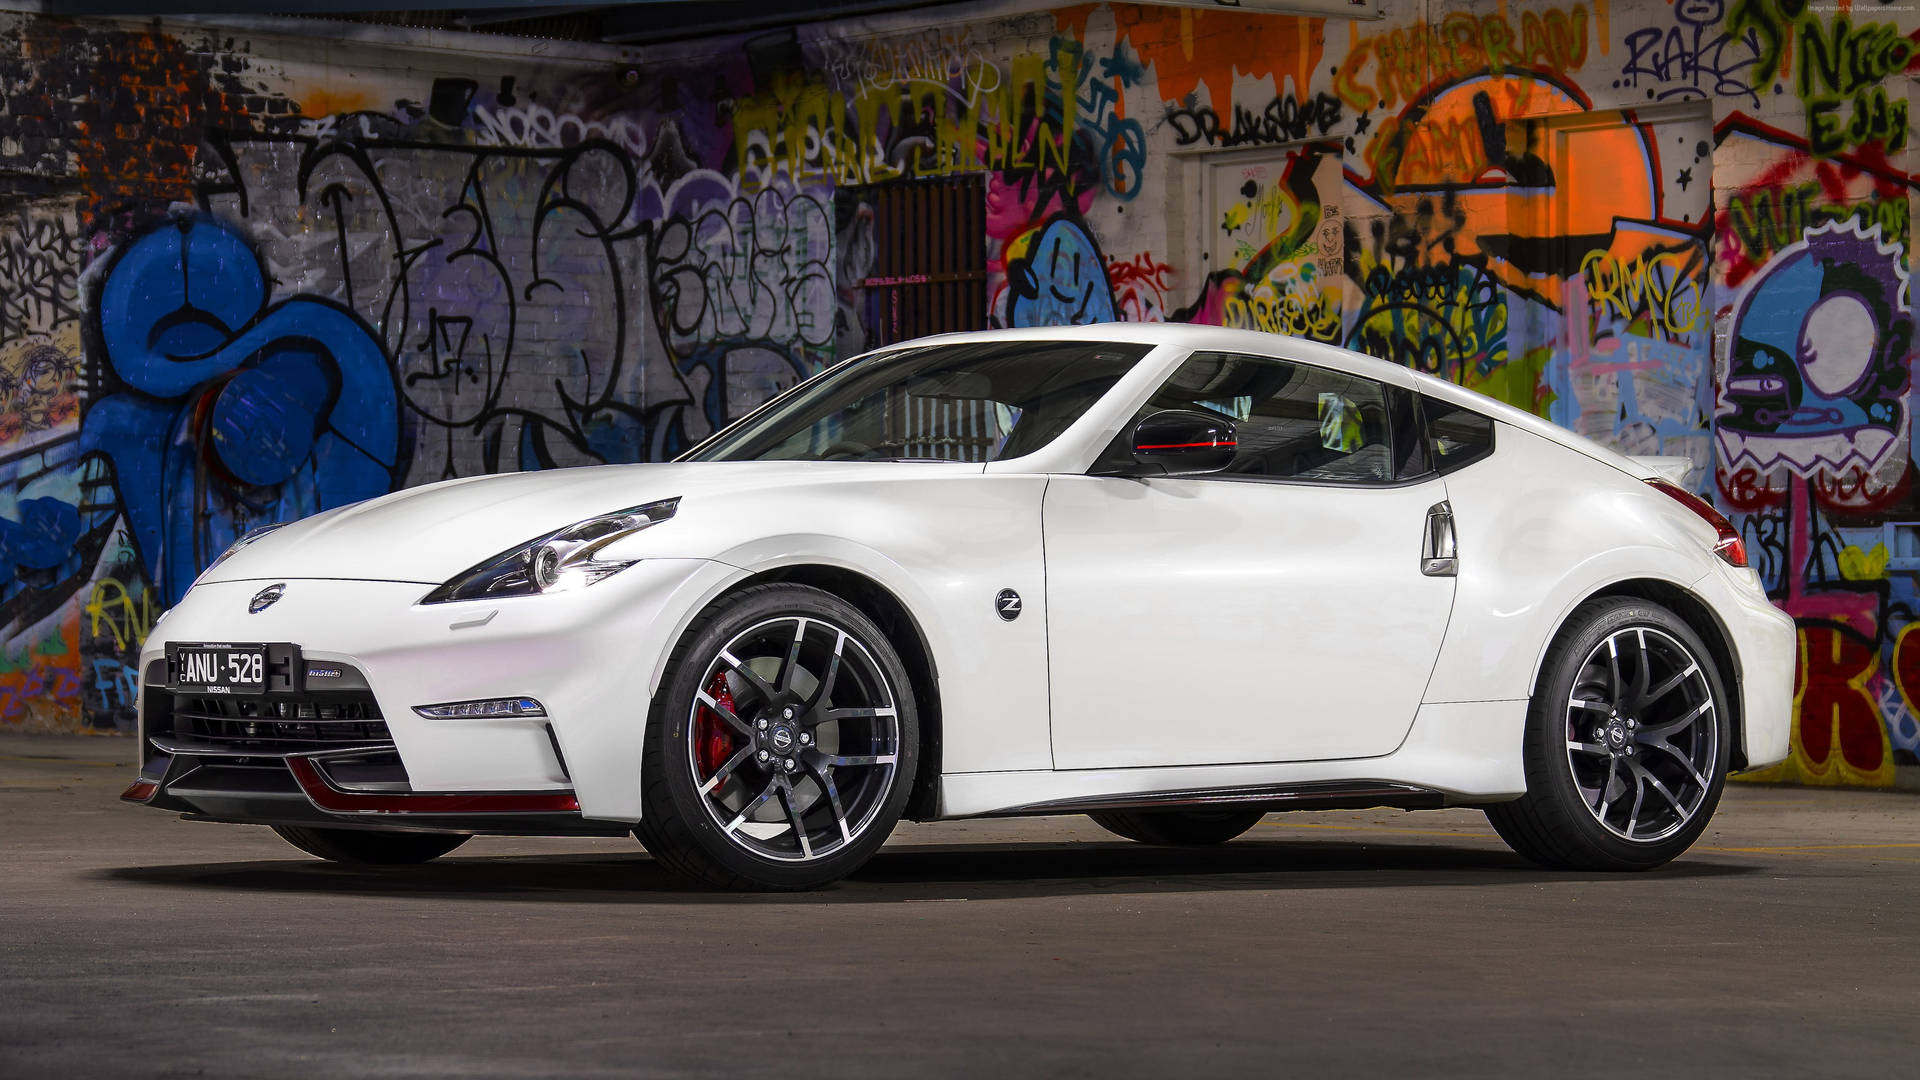 Nissan 370z With Colorful Graffiti Wallpaper